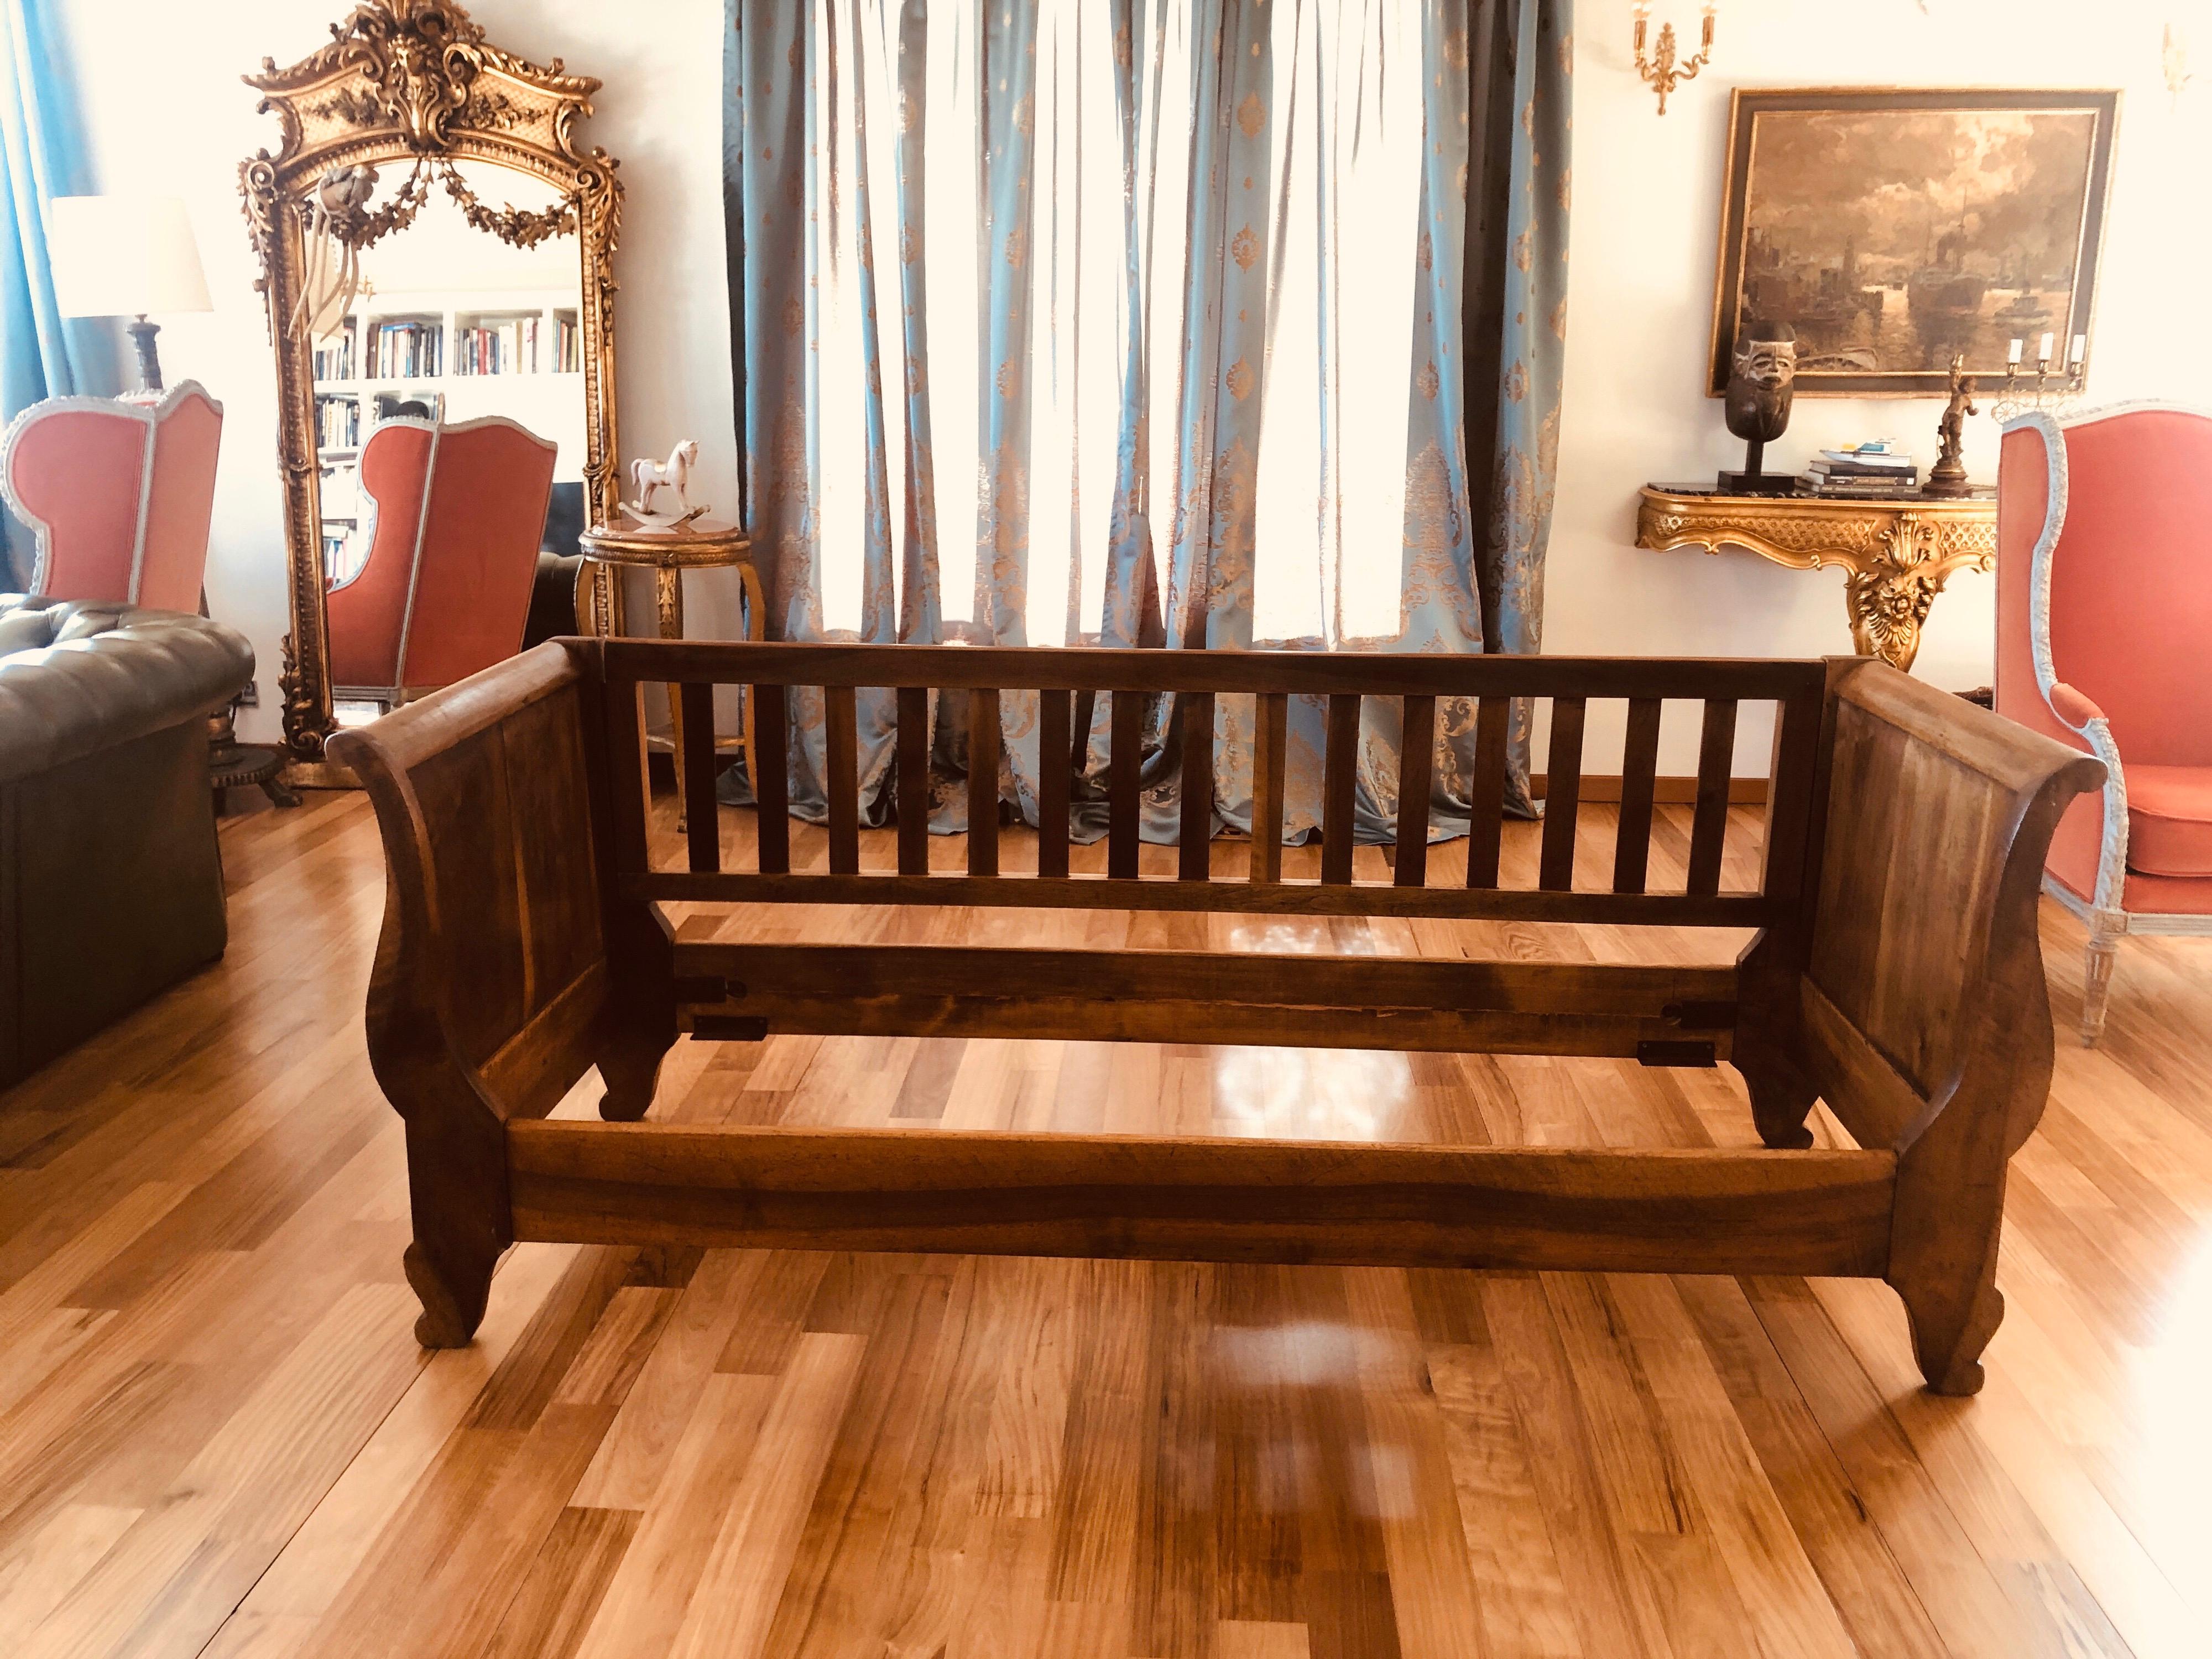 Authentic Savoyard bench frame made of walnut wood in very good condition.
All original parts without any restorations.
France, circa 1860.